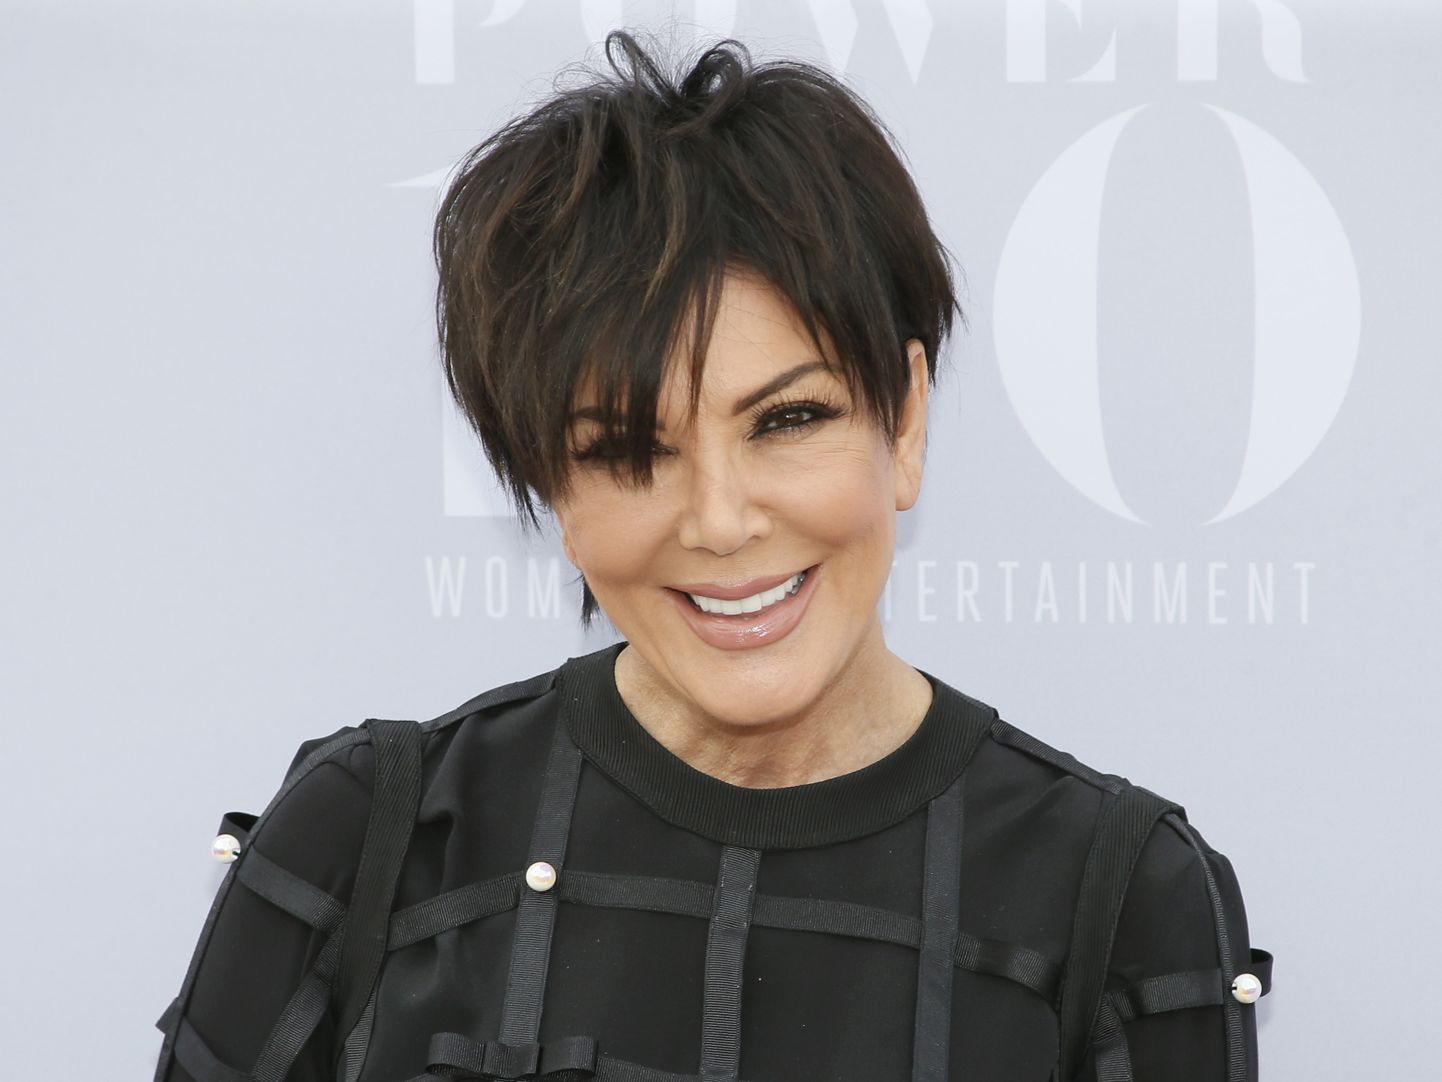 Television personality Kris Jenner poses at The Hollywood Reporter's Annual Women in Entertainment Breakfast in Los Angeles, California December 9, 2015. REUTERS/Danny Moloshok